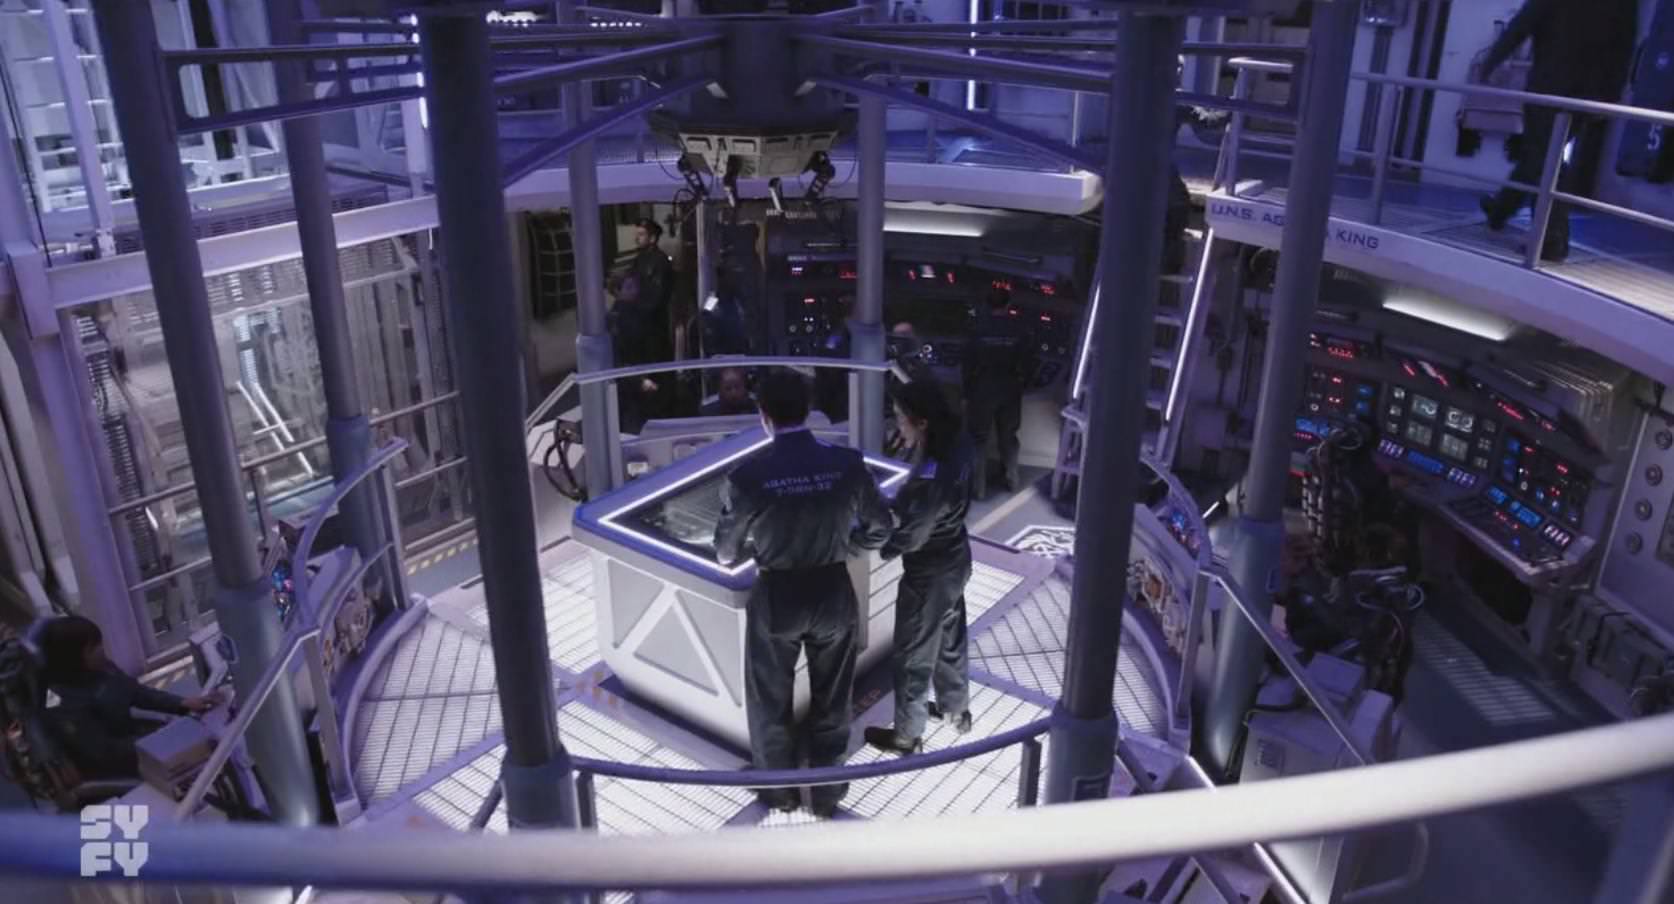 Bridge of the Agatha King showing 2 crew members huddled around the center control console.